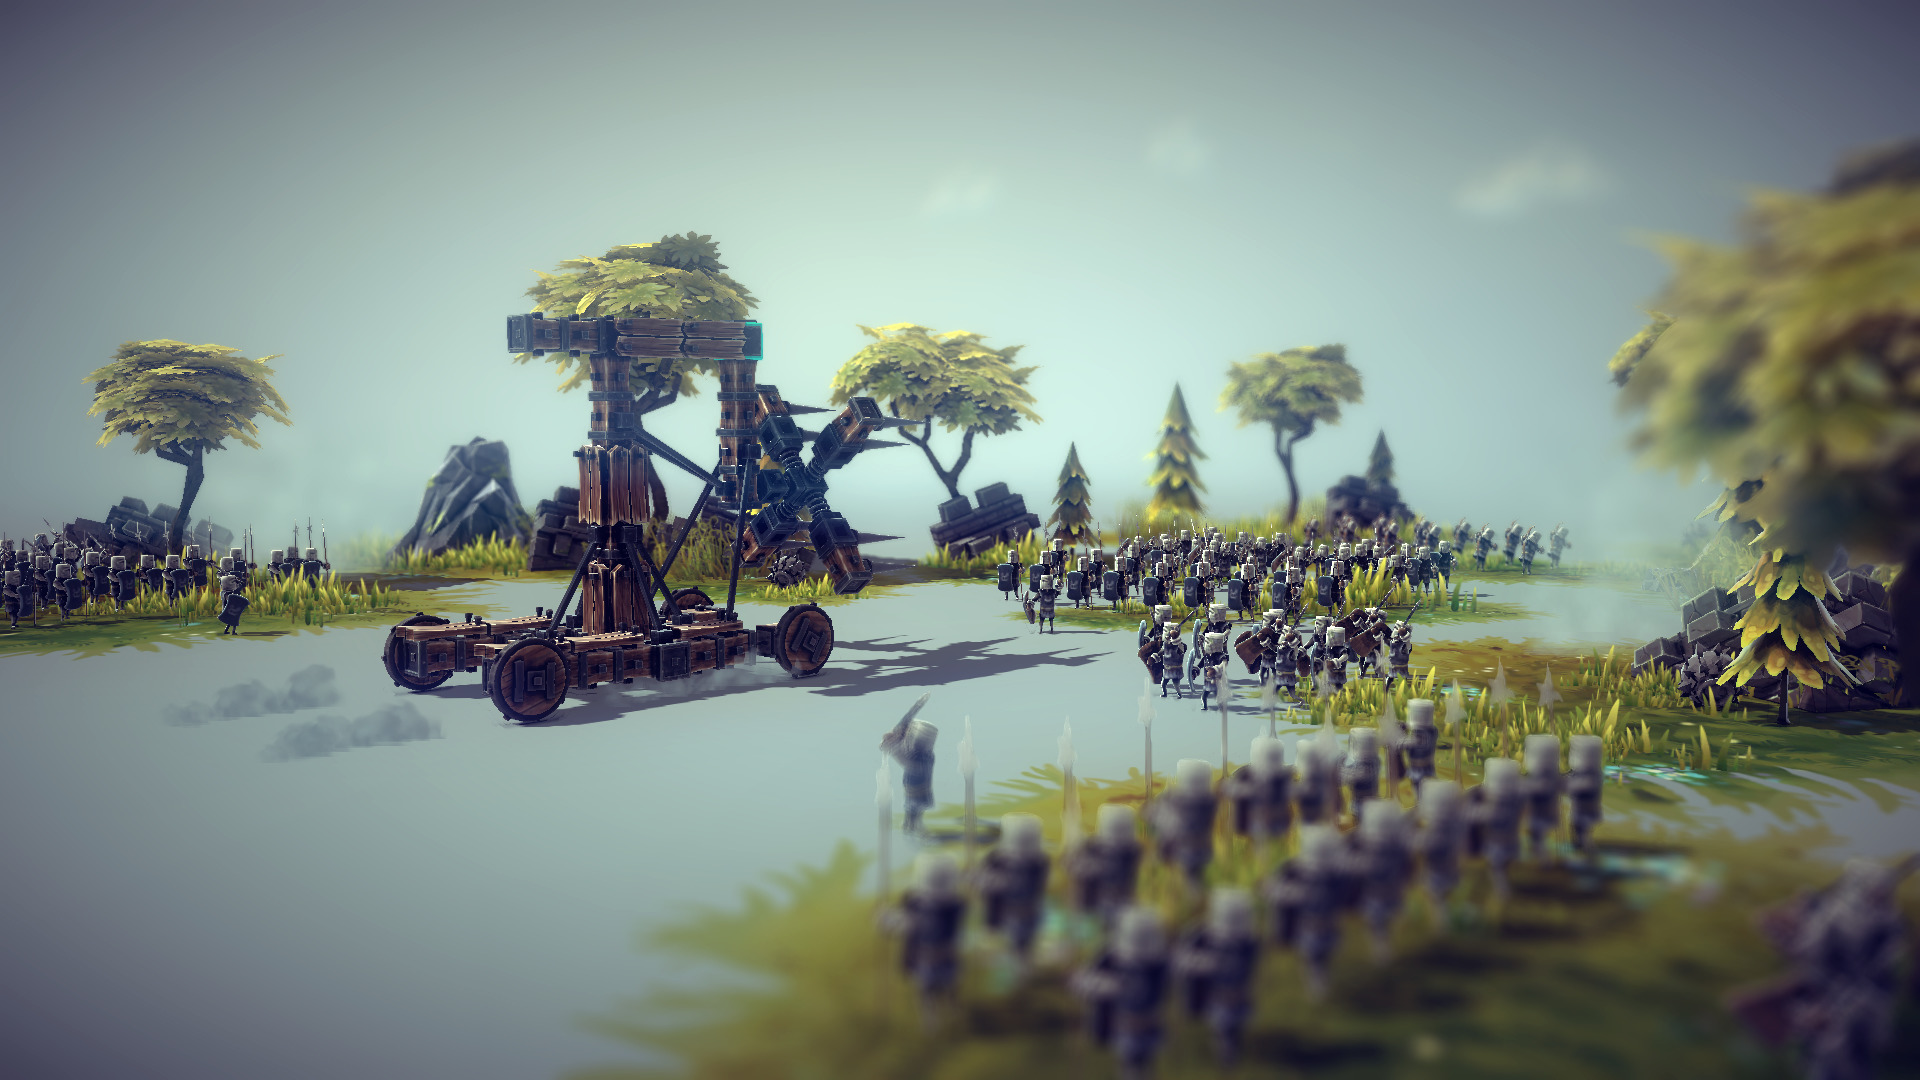 besiege mobile download free